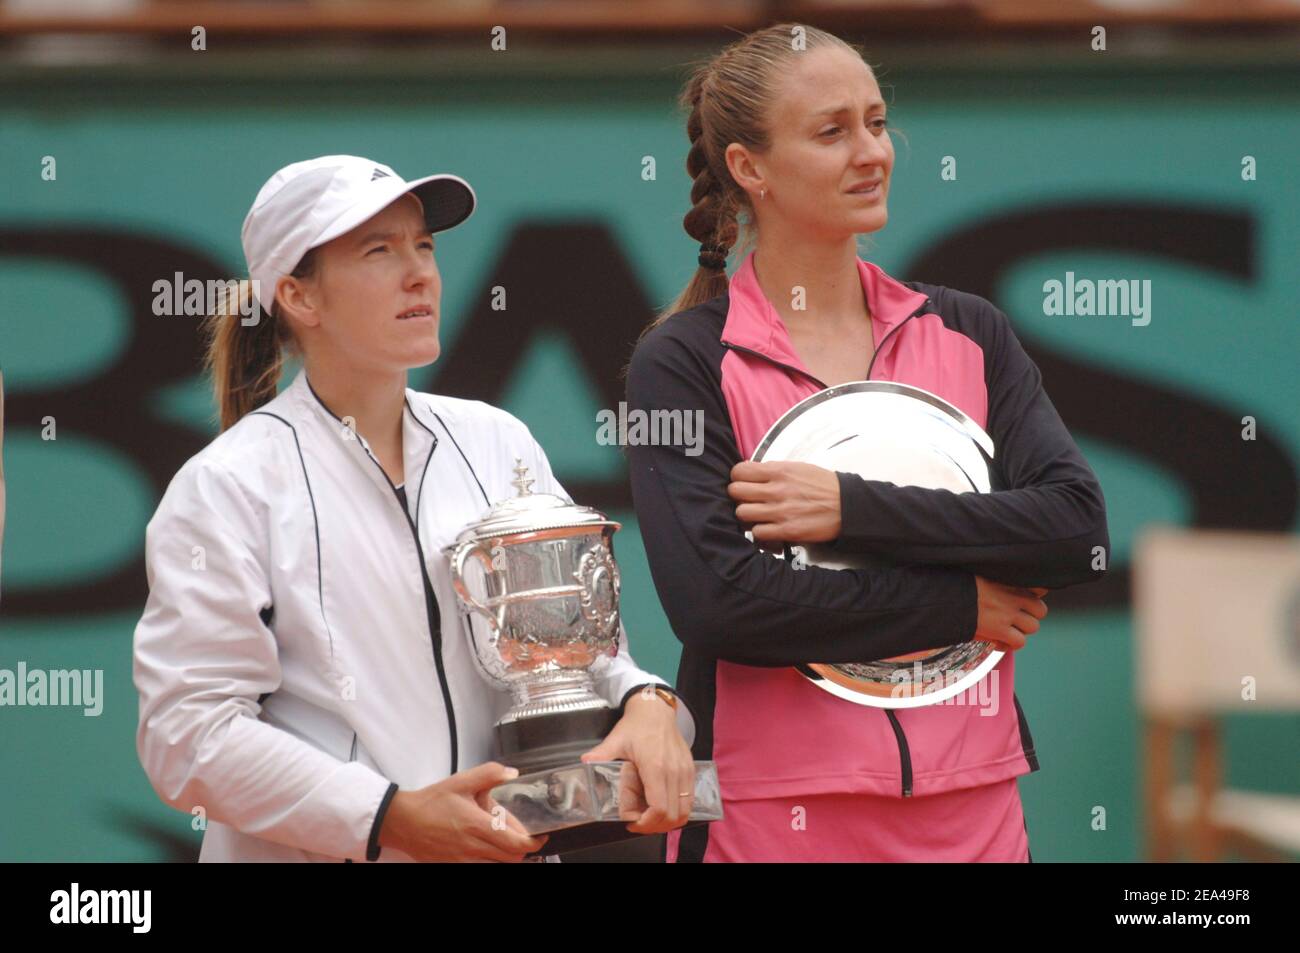 Belgian Justine Henin-Hardenne defeats French Mary Pierce 6-1, 6-1 in the Final of the French Tennis open at Roland Garros arena in Paris, on June 4, 2005. Photo by Gorassini-Zabulon/CAMELEON/ABACA. Stock Photo